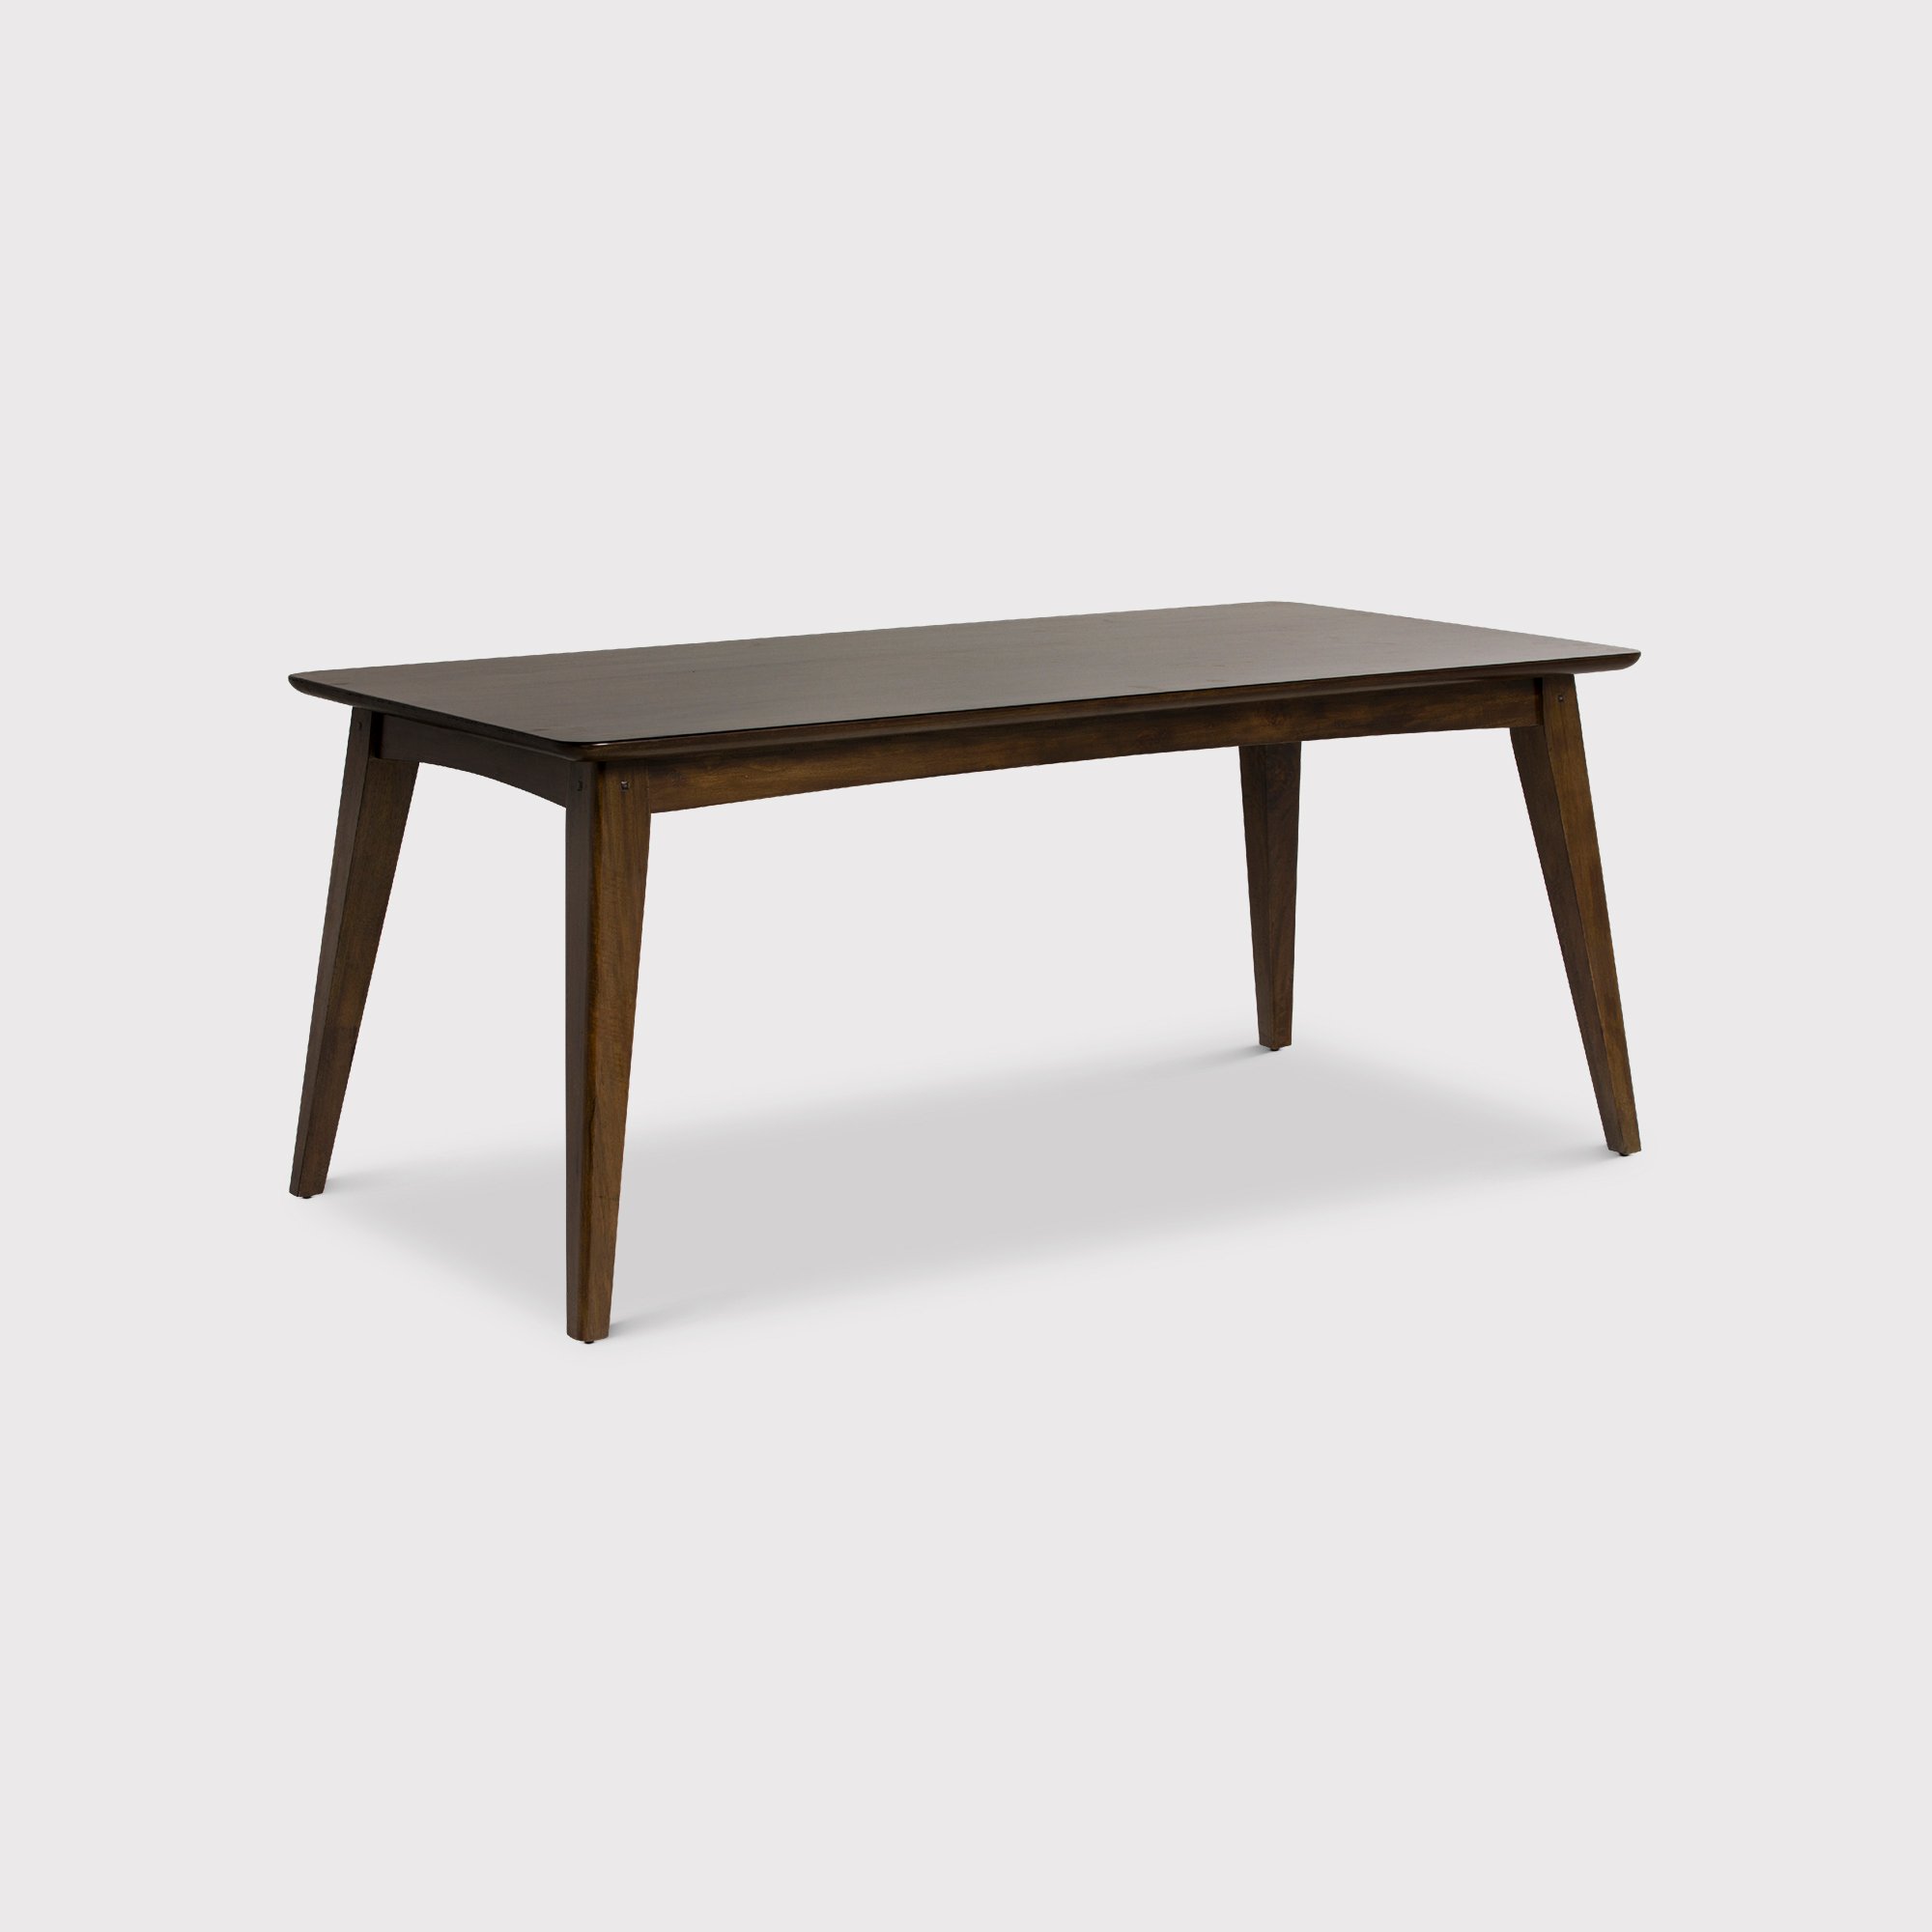 Vermont Dining Table 180cm, Mango Wood | Barker & Stonehouse